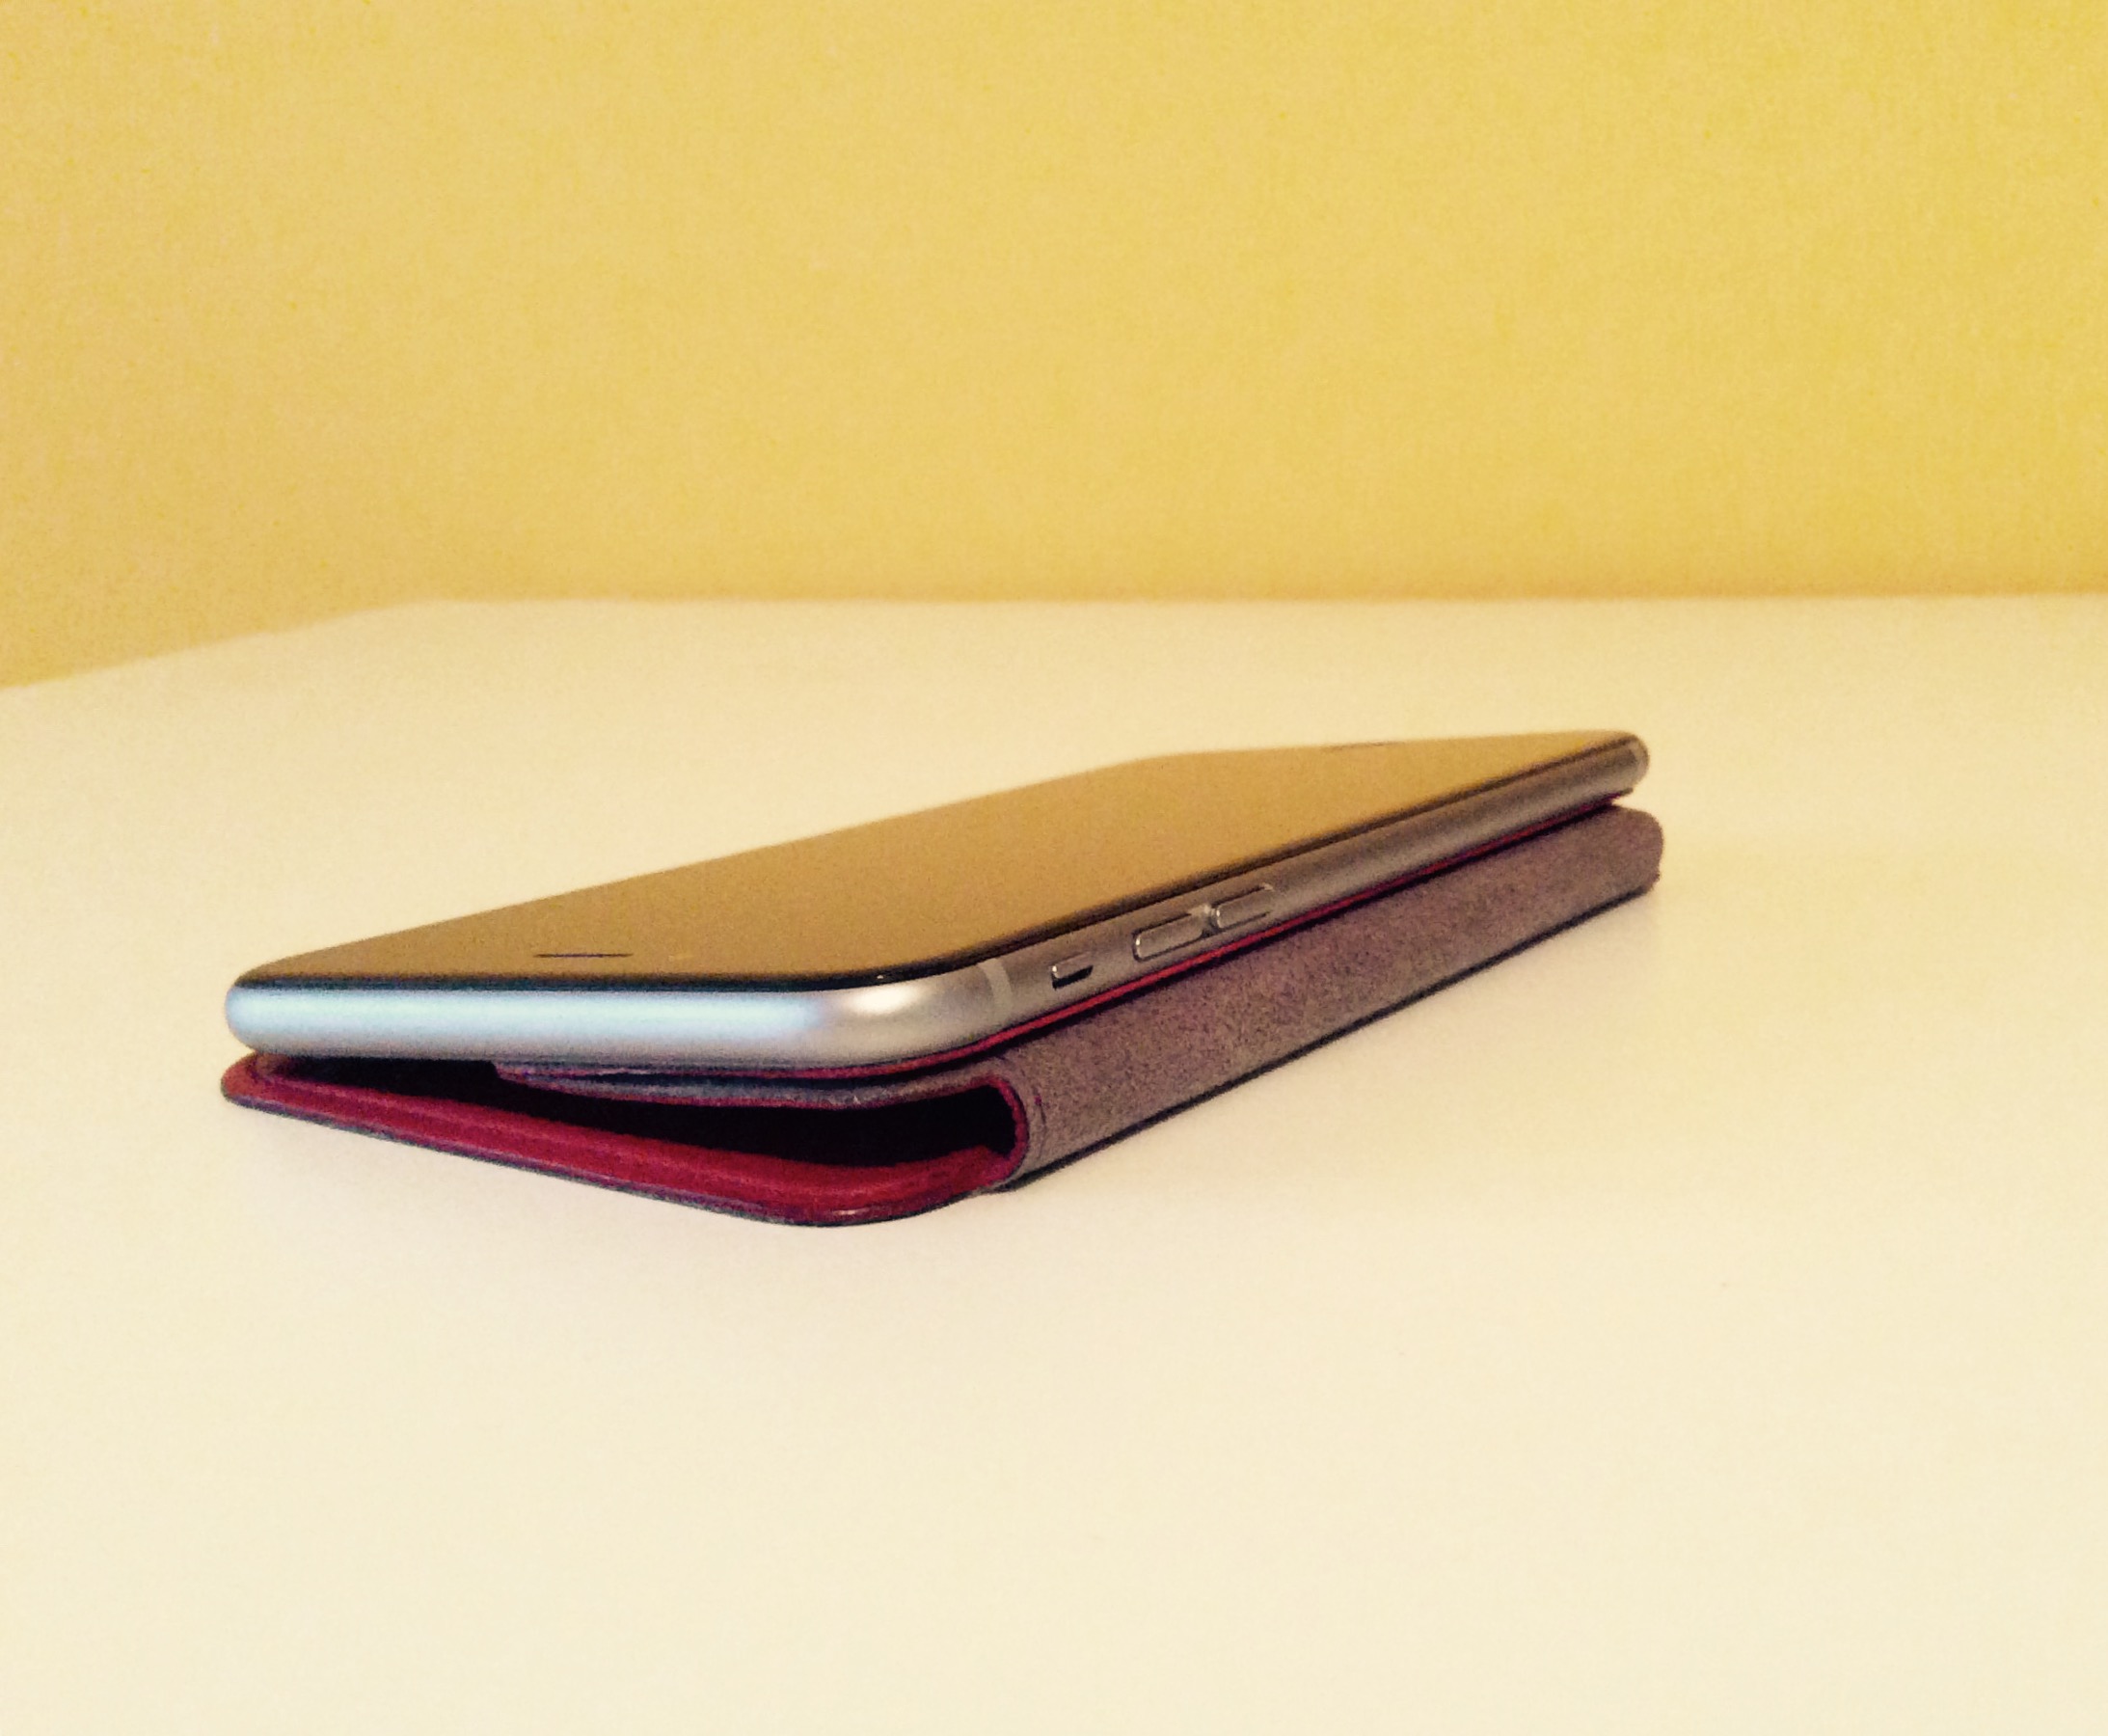 Twelve South SurfacePad for iPhone 6 Plus image 00021